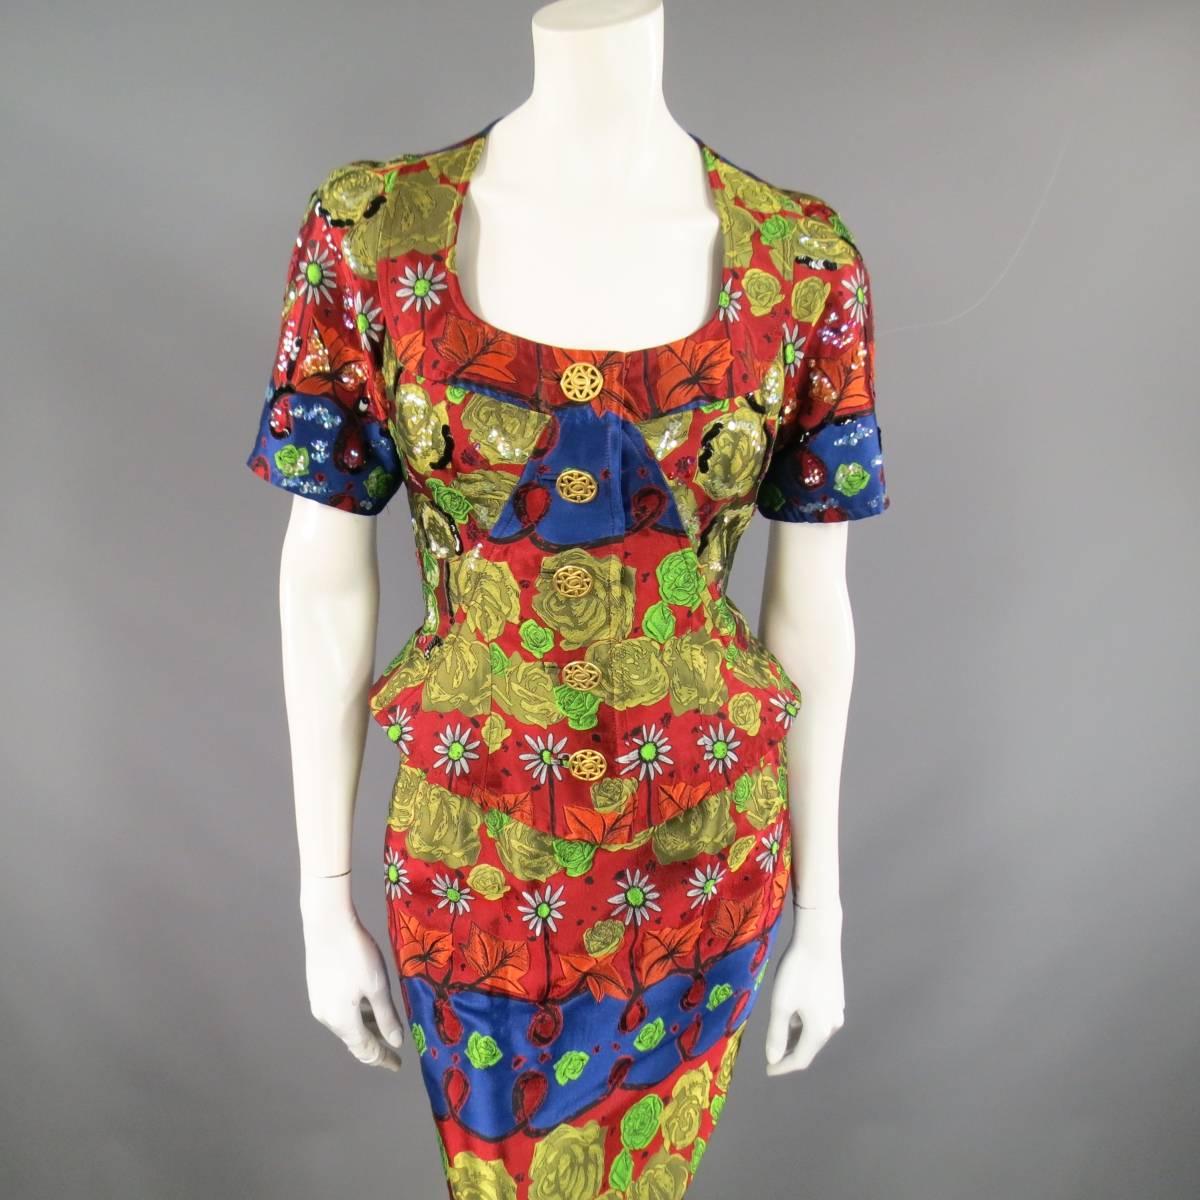 This stunning archival CHRISTIAN LACROIX skirt suit comes in a gorgeous metallic red and navy satin with yellow and green rose and daisy floral print and includes a structured short sleeved, scoop neck jacket with gold buttons and matching pencil